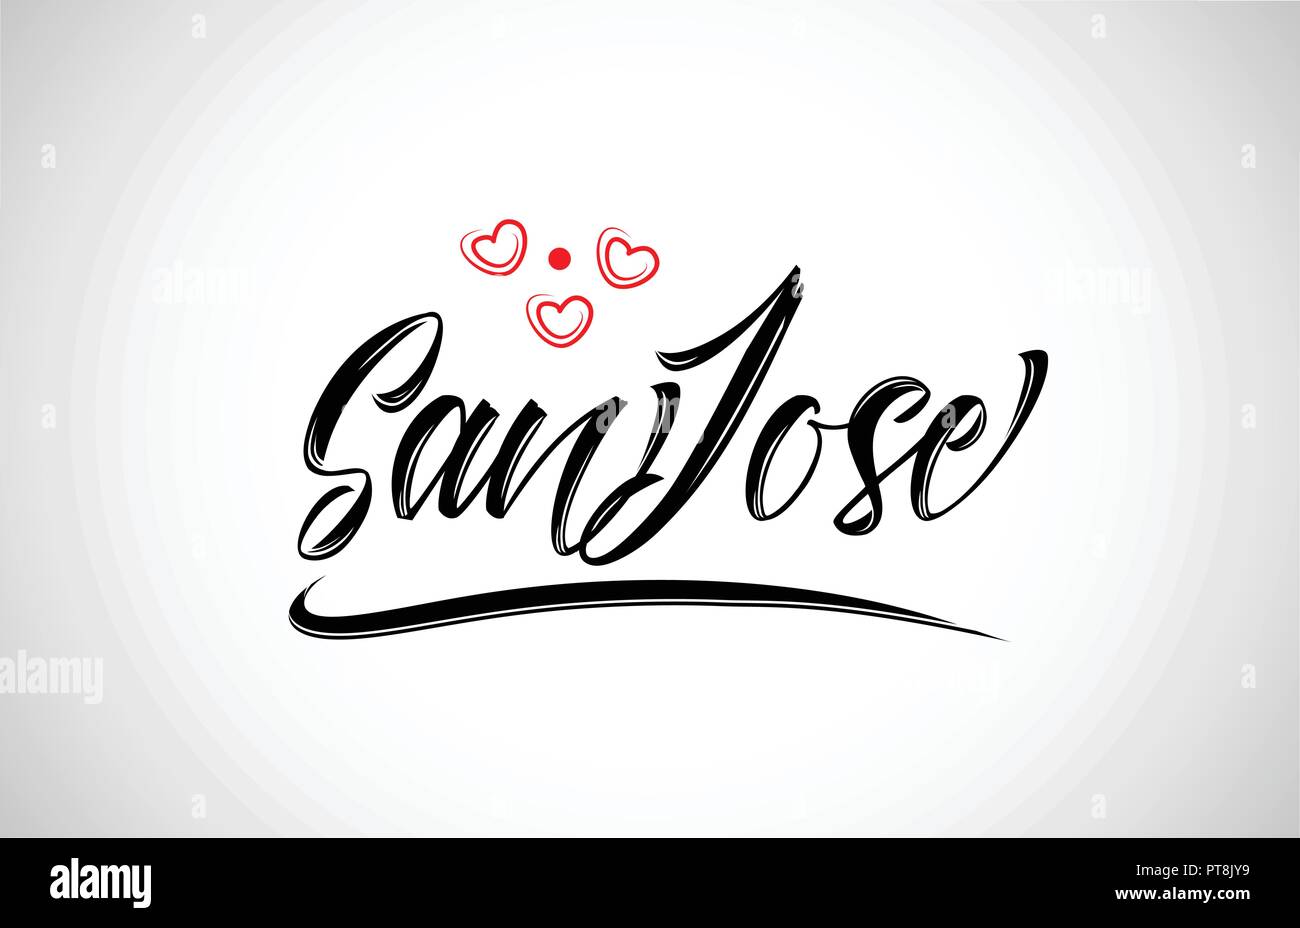 san jose city text design with red heart typographic icon design suitable for touristic promotion Stock Vector